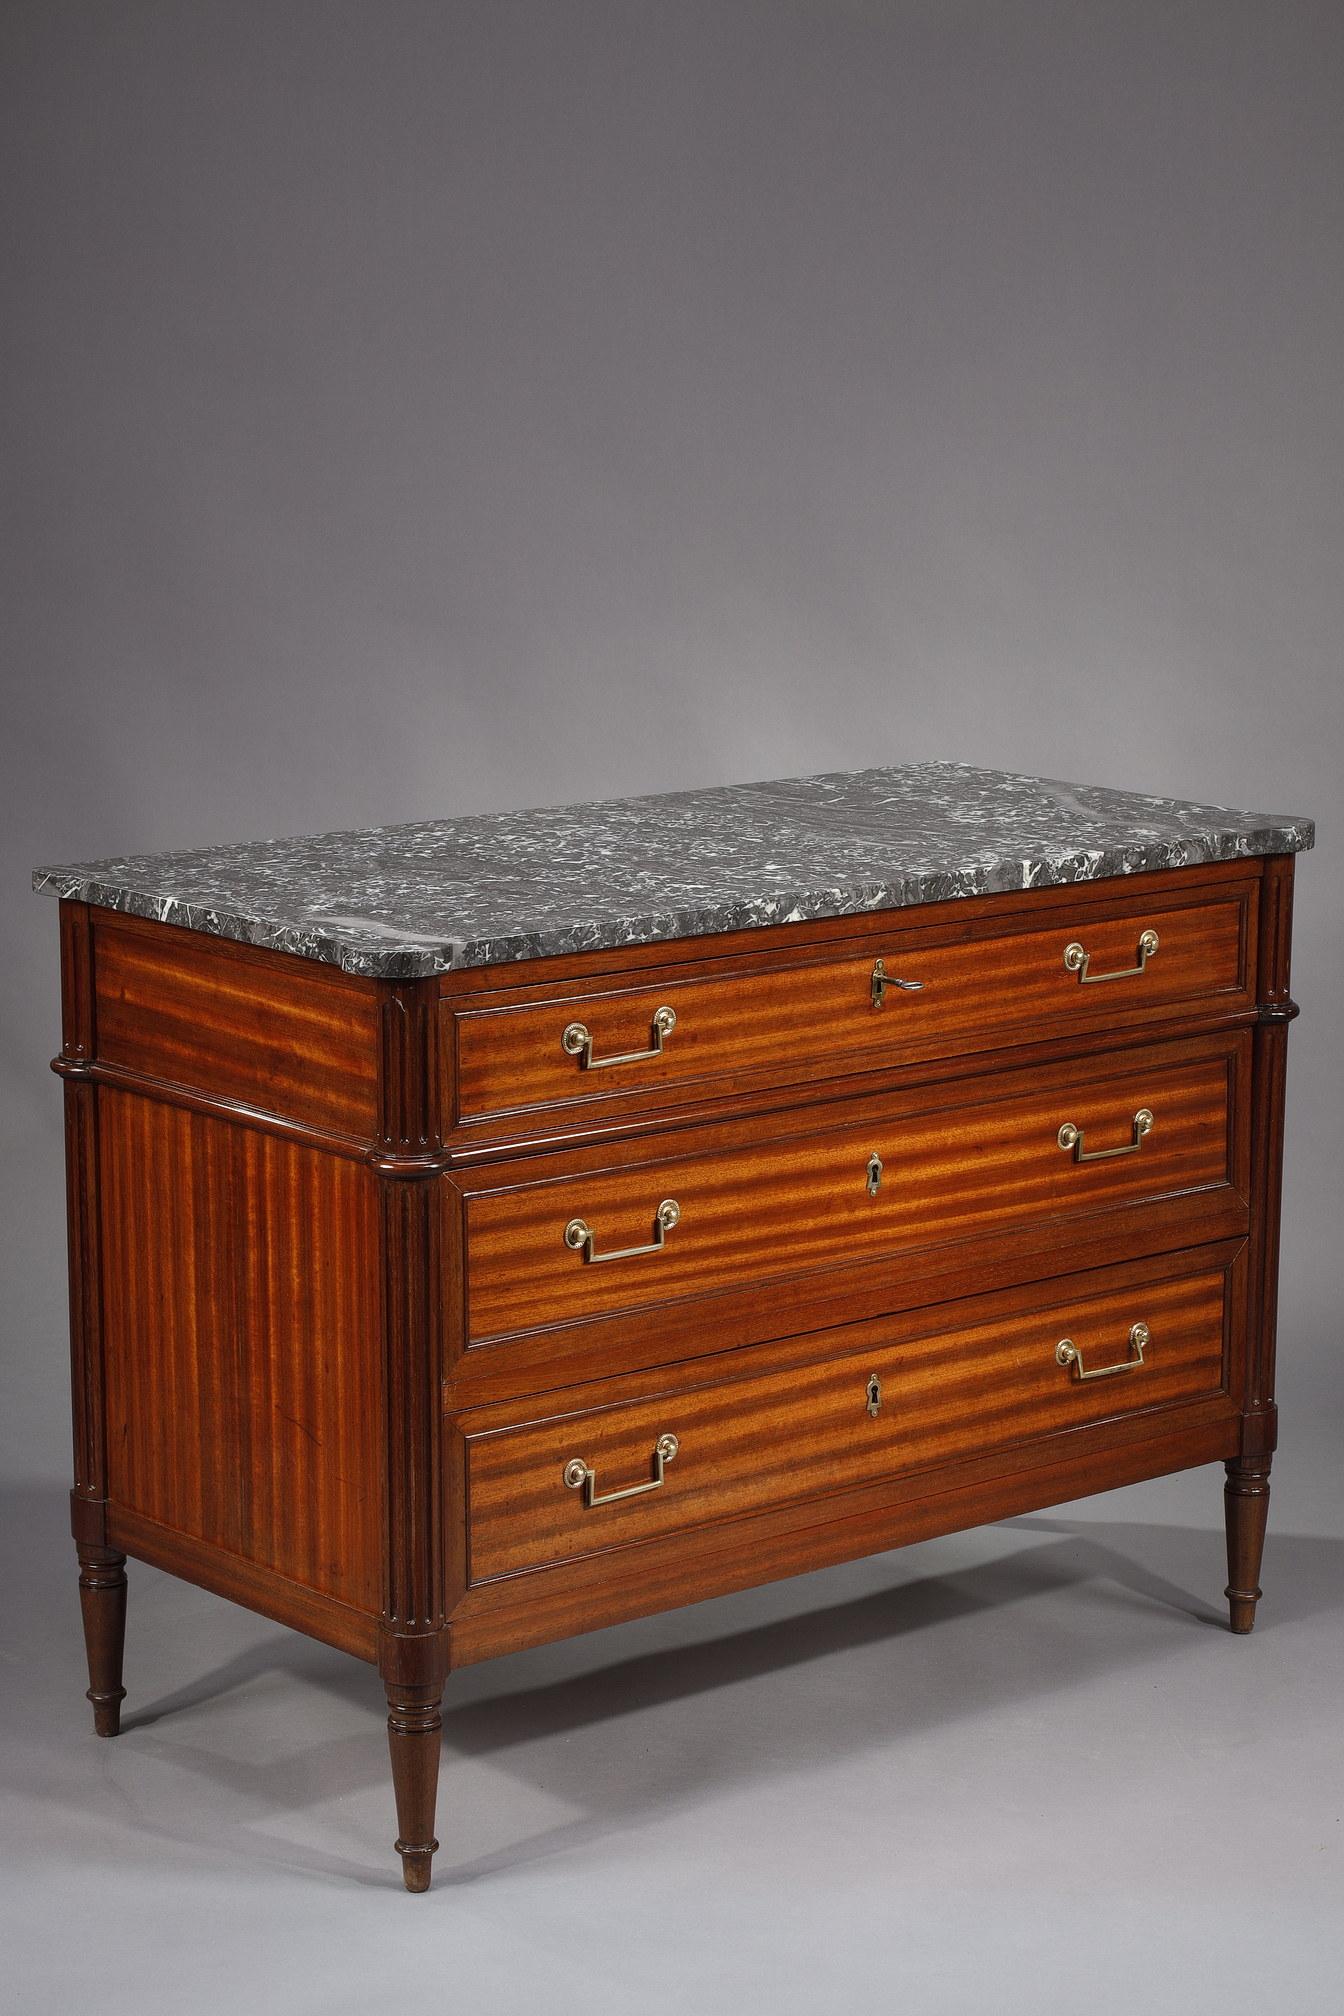 Louis XVI style chest of drawers in mahogany and flamed mahogany veneer. This piece of furniture is composed of three drawers with brass handles and fluted posts. The top is in grey Saint-Anne marble. The unit rests on turned and tapered legs.